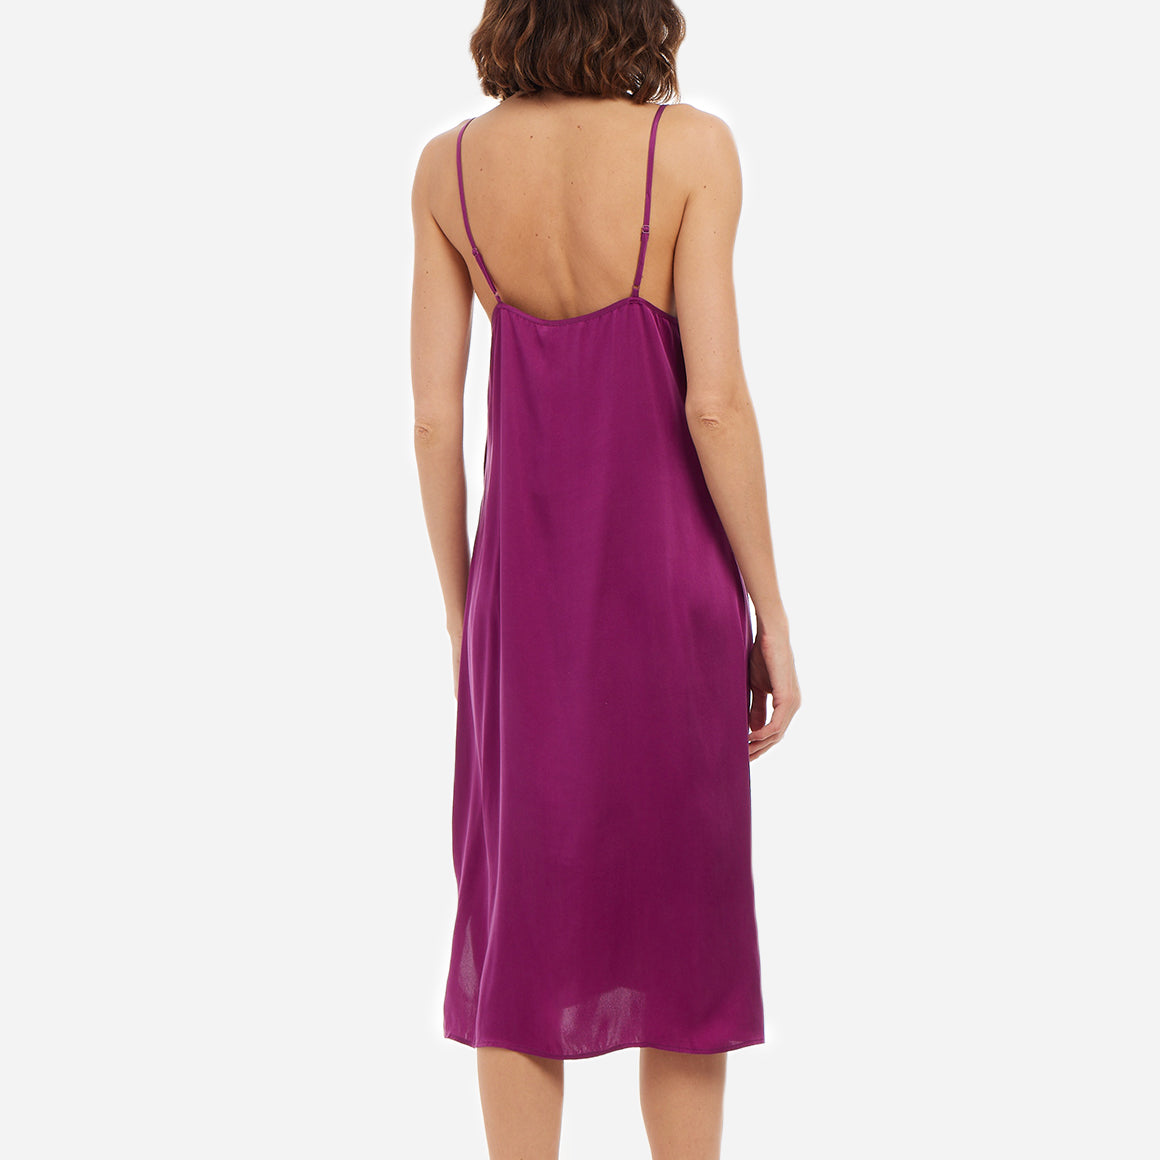 Crafted with meticulous attention to detail, this chemise is made from semi-sheer silk, which feels soft and gentle against your skin. The adjustable straps ensure a customized fit, while the v-neckline adds an elegant touch. The just below the knee length and airy drape allows for freedom of movement.